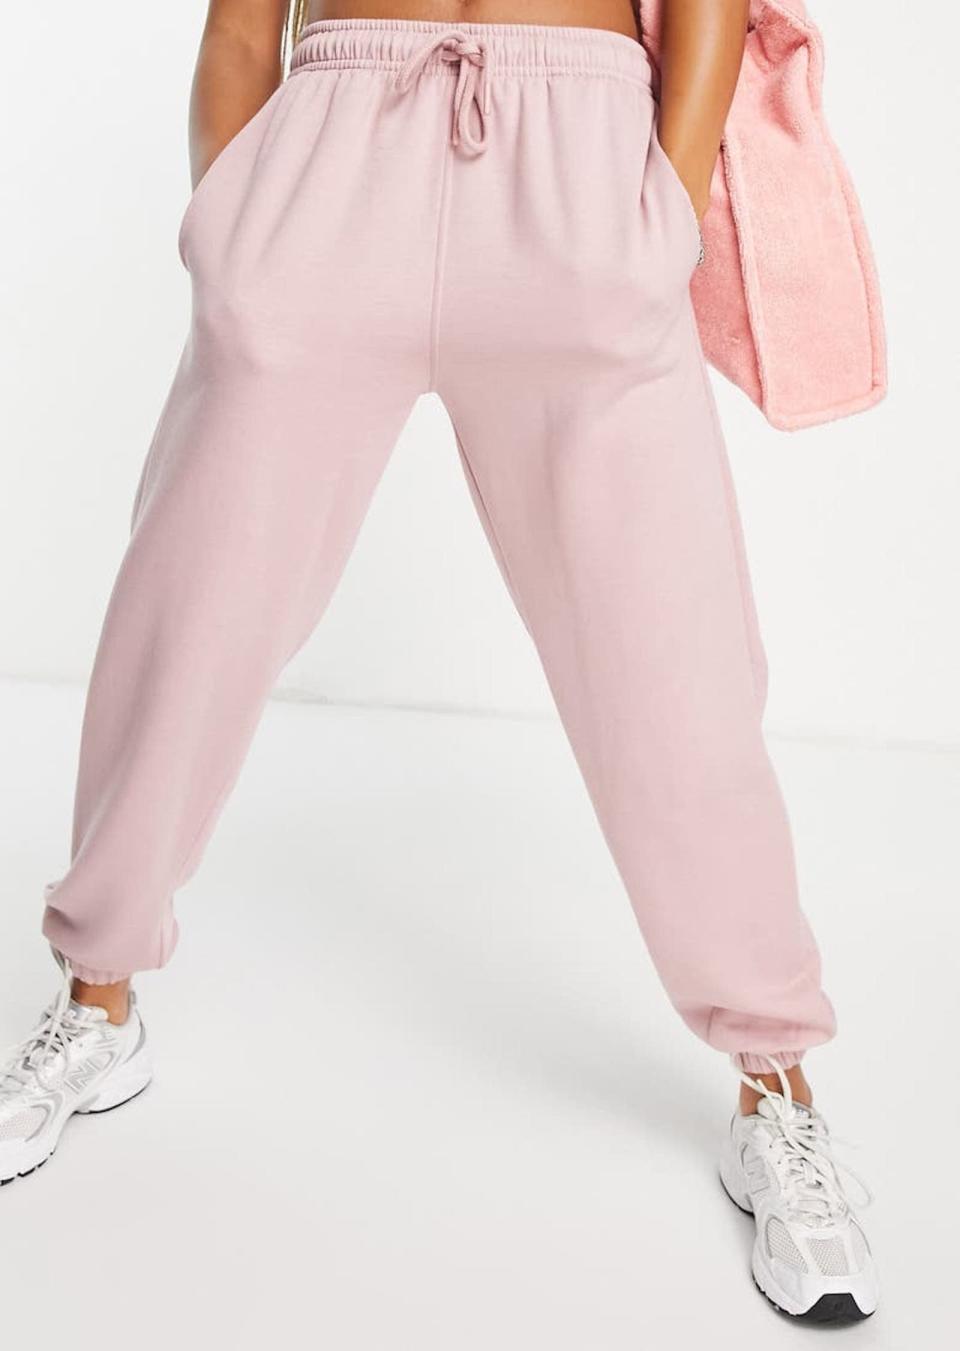 Team up these roomy sweats with a cropped tee and <a href="https://www.glamour.com/gallery/best-white-sneakers?mbid=synd_yahoo_rss" rel="nofollow noopener" target="_blank" data-ylk="slk:cool, white sneakers" class="link rapid-noclick-resp">cool, white sneakers</a> for an effortless everyday look. $58, Nordstrom. <a href="https://www.nordstrom.com/s/topshop-oversize-joggers/6524620" rel="nofollow noopener" target="_blank" data-ylk="slk:Get it now!" class="link rapid-noclick-resp">Get it now!</a>